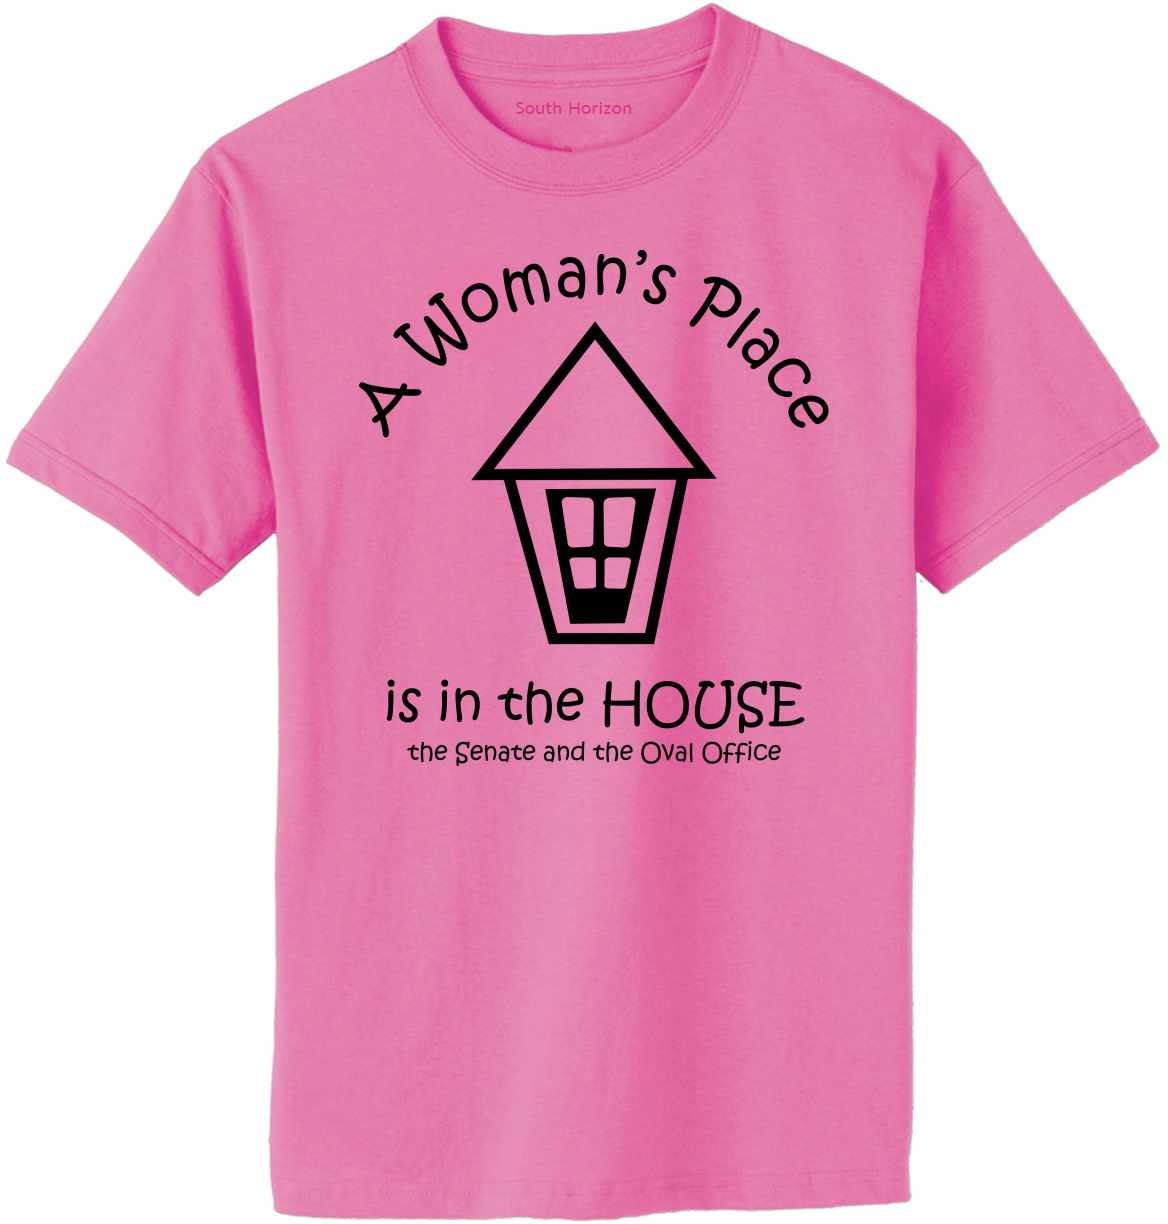 A Woman's Place is in the House, Senate & Oval Office Adult T-Shirt